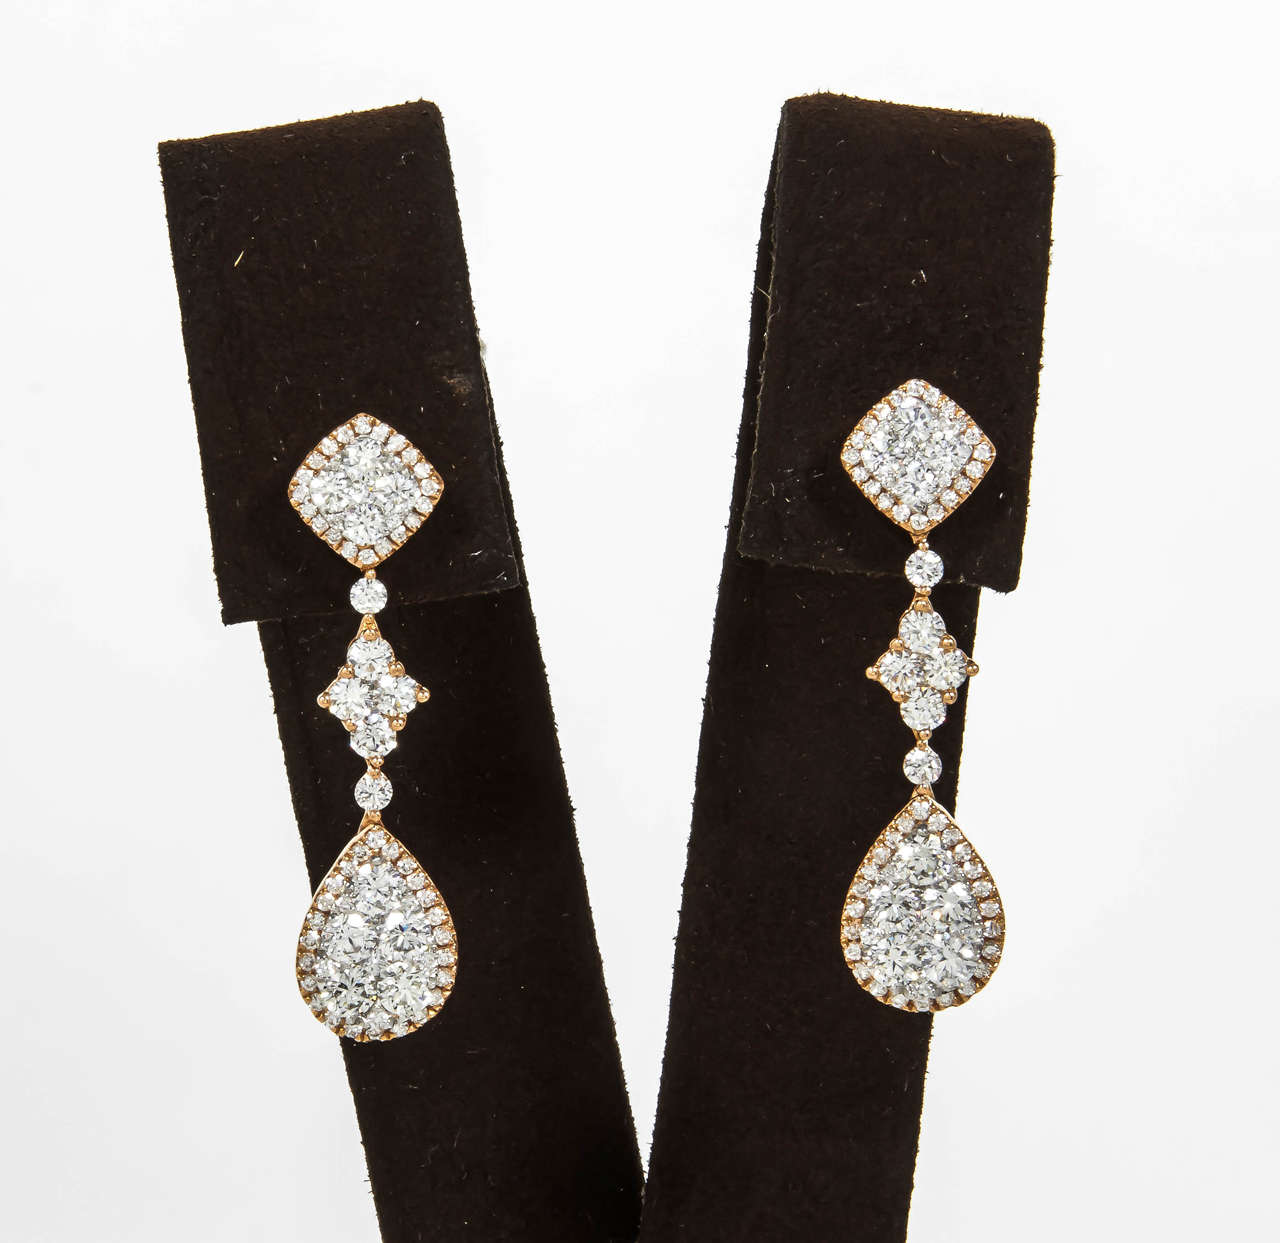 A stunning pair of earrings that can be worn for a lifetime. 

2.77 carats of round brilliant cut diamonds all F color VS clarity set in 18k Rose Gold. 

Approx 1.3 inches in length from post. The entire earring is over 1.5 inches long.